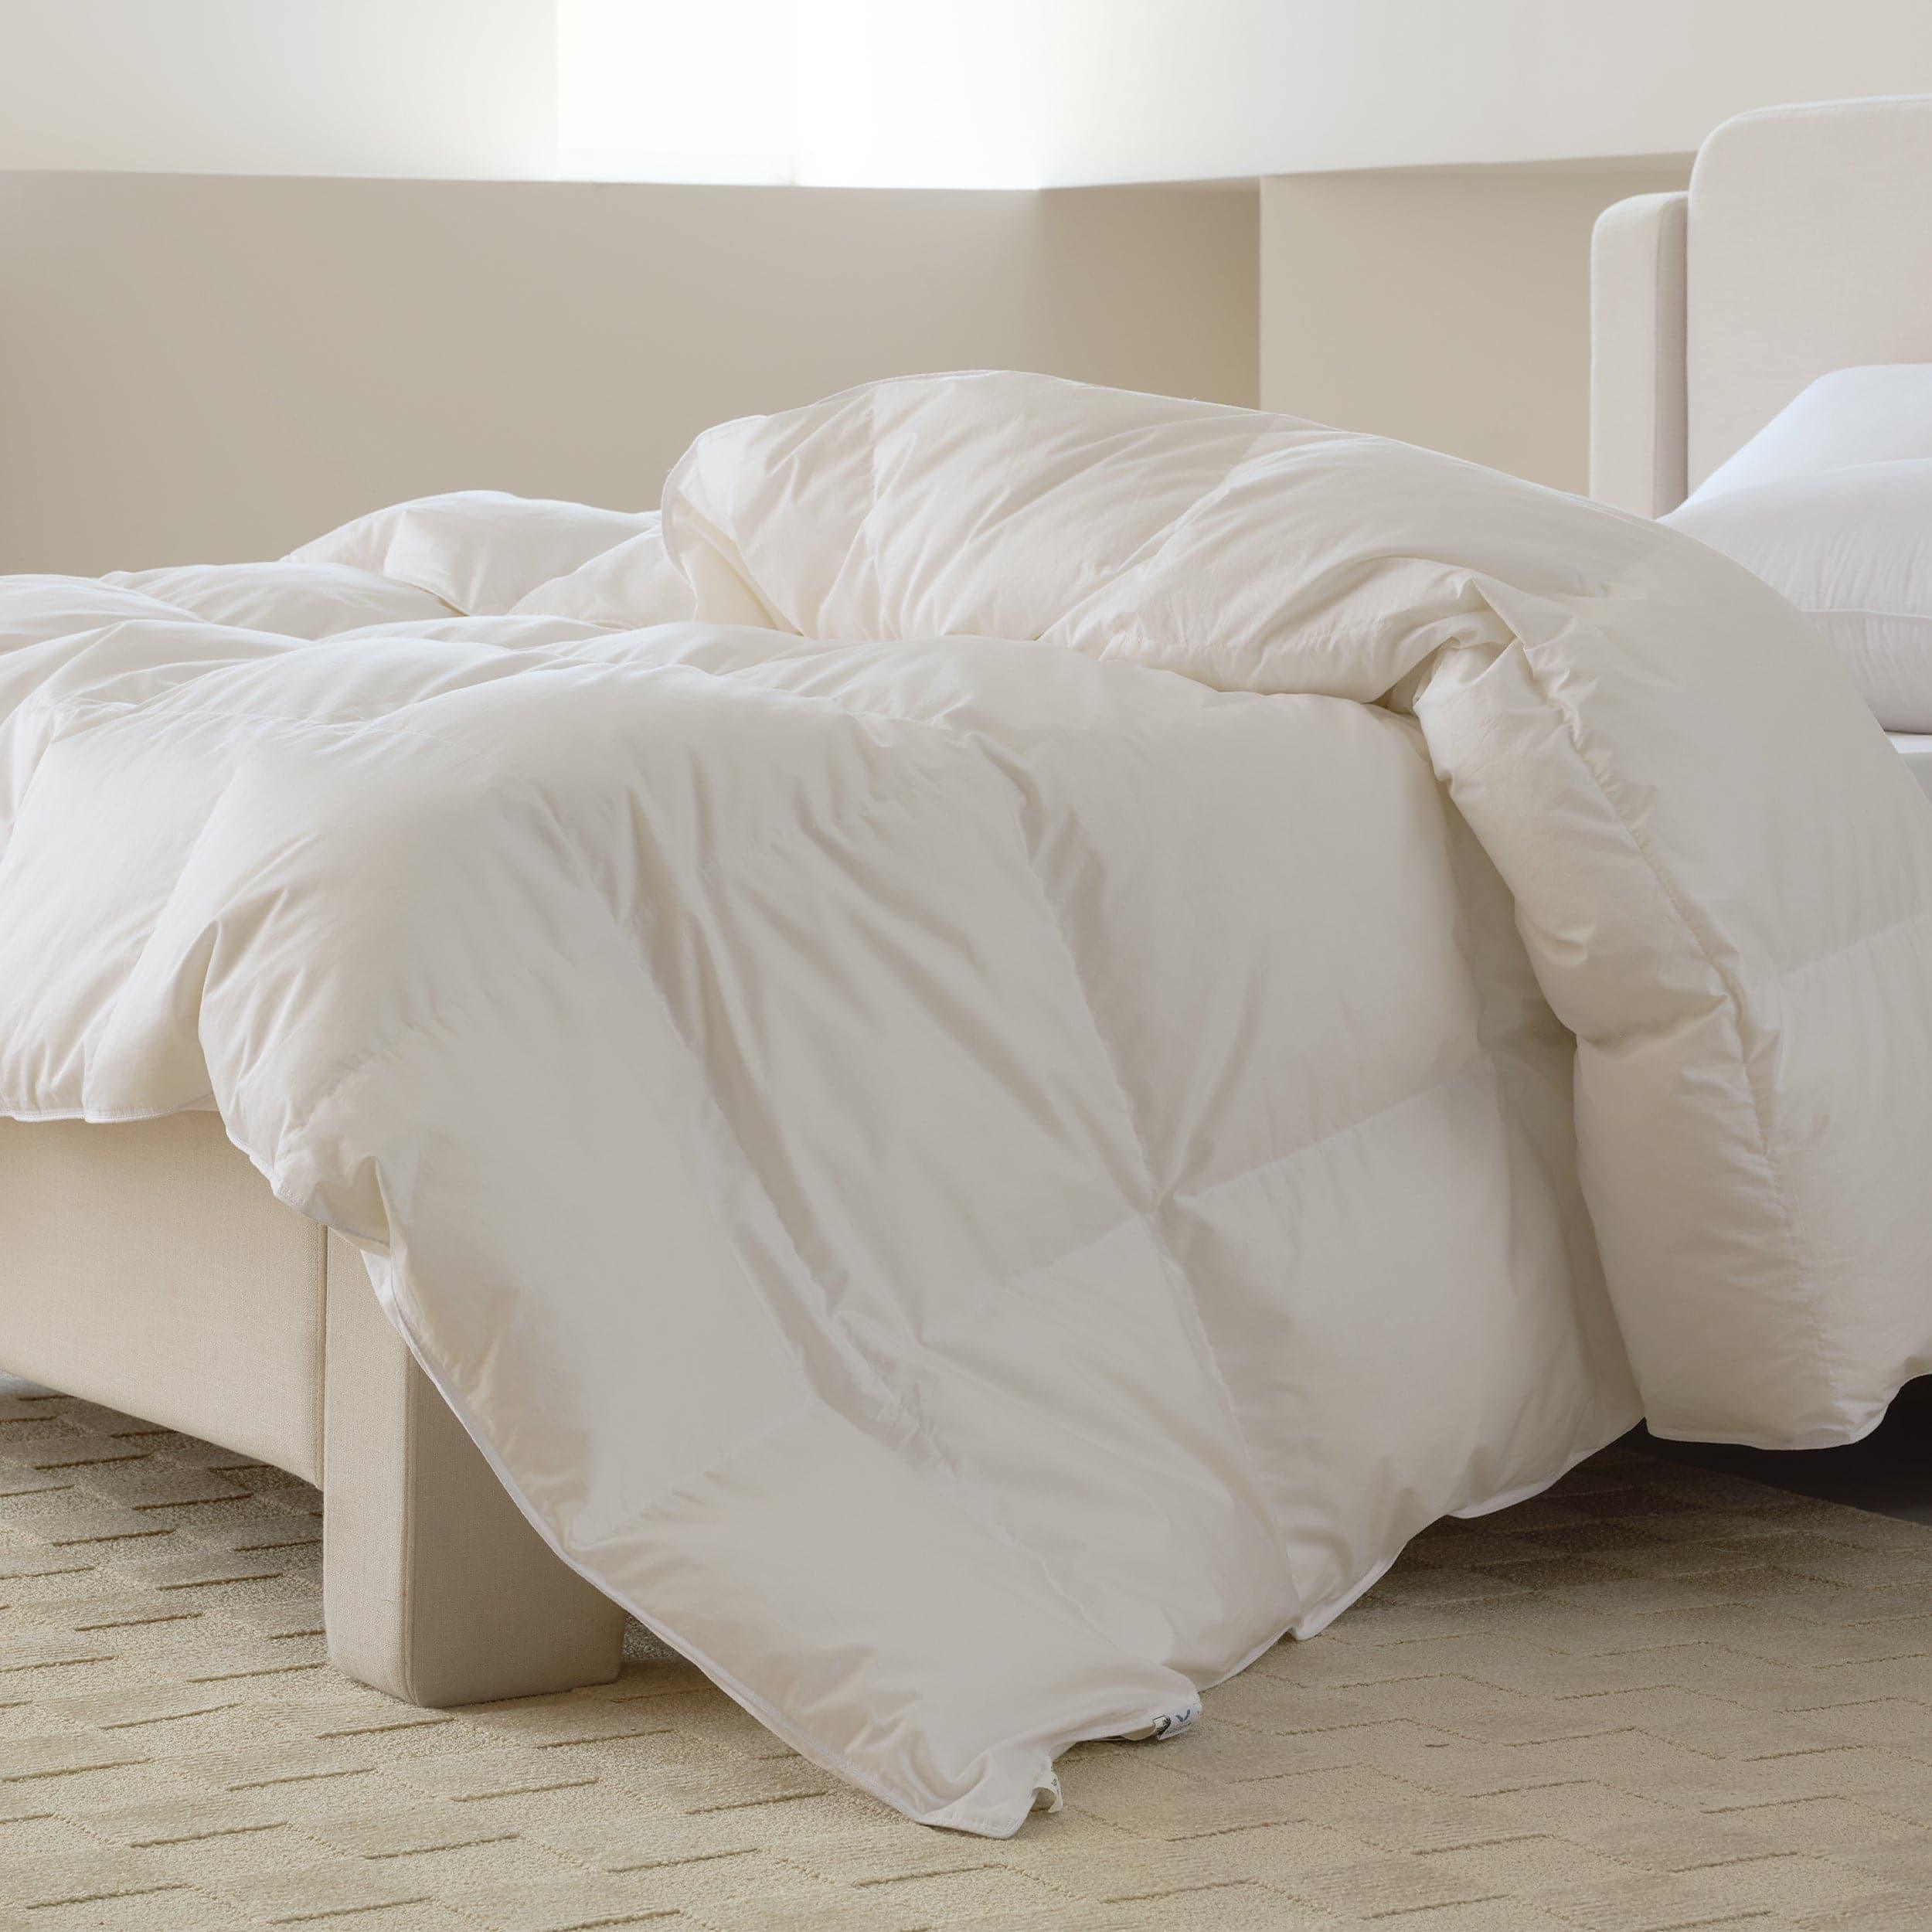 Enhance the look and feel of your bedroom with our king duvet insert.